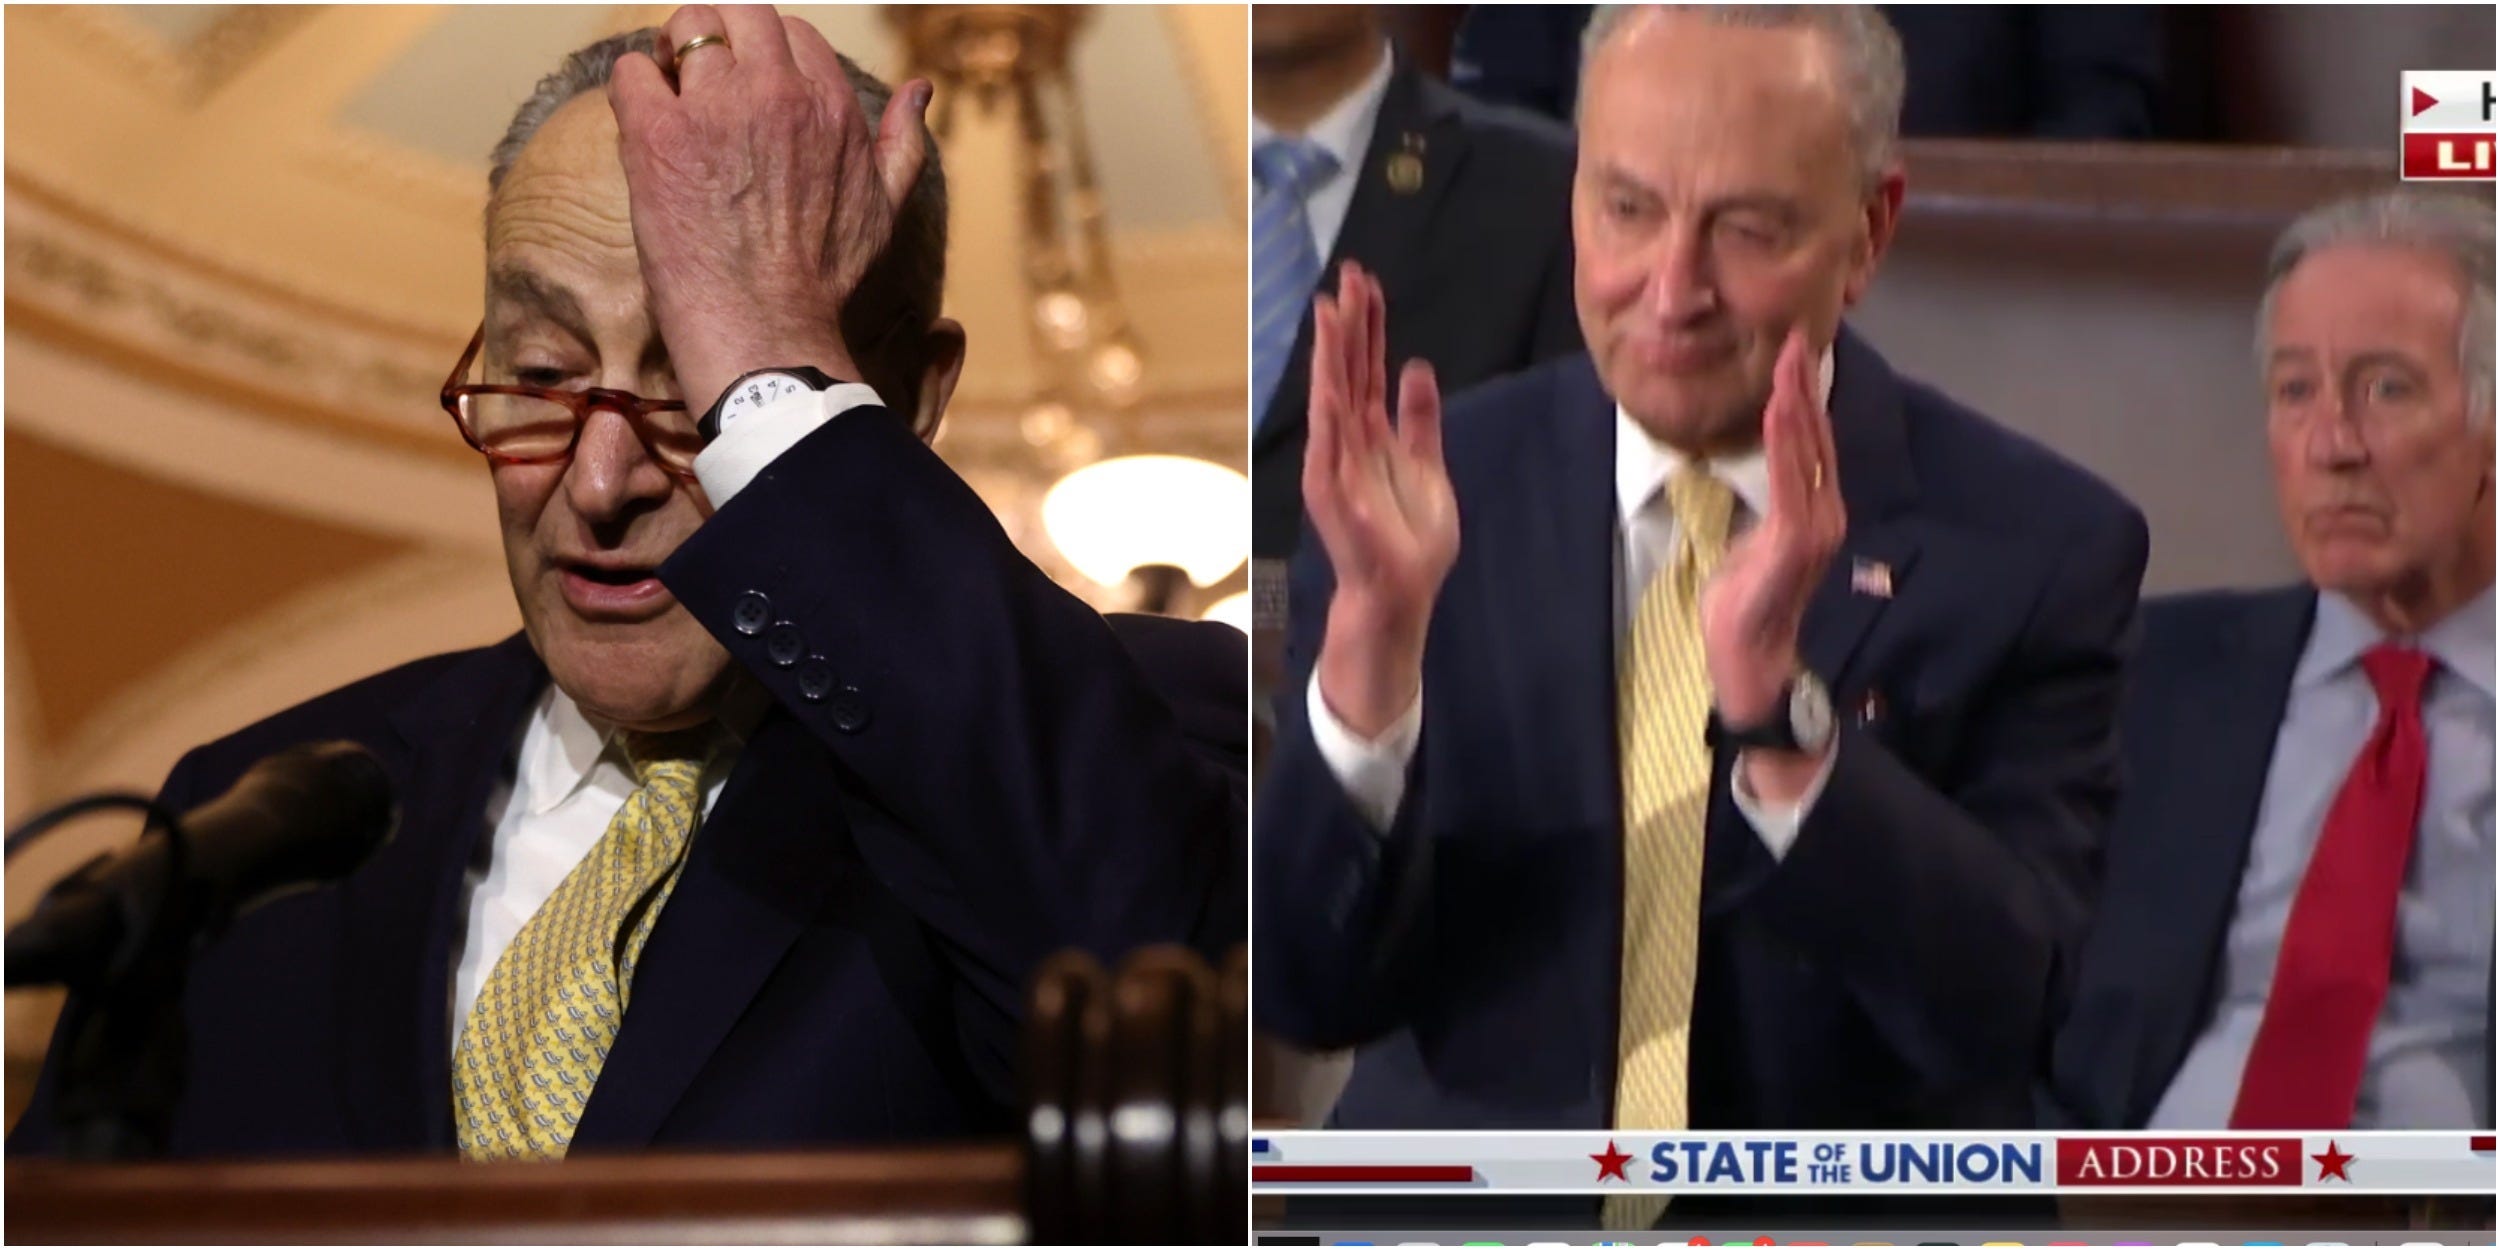 Collage: Chuck Schumer holding his forehead, half standing in applause.